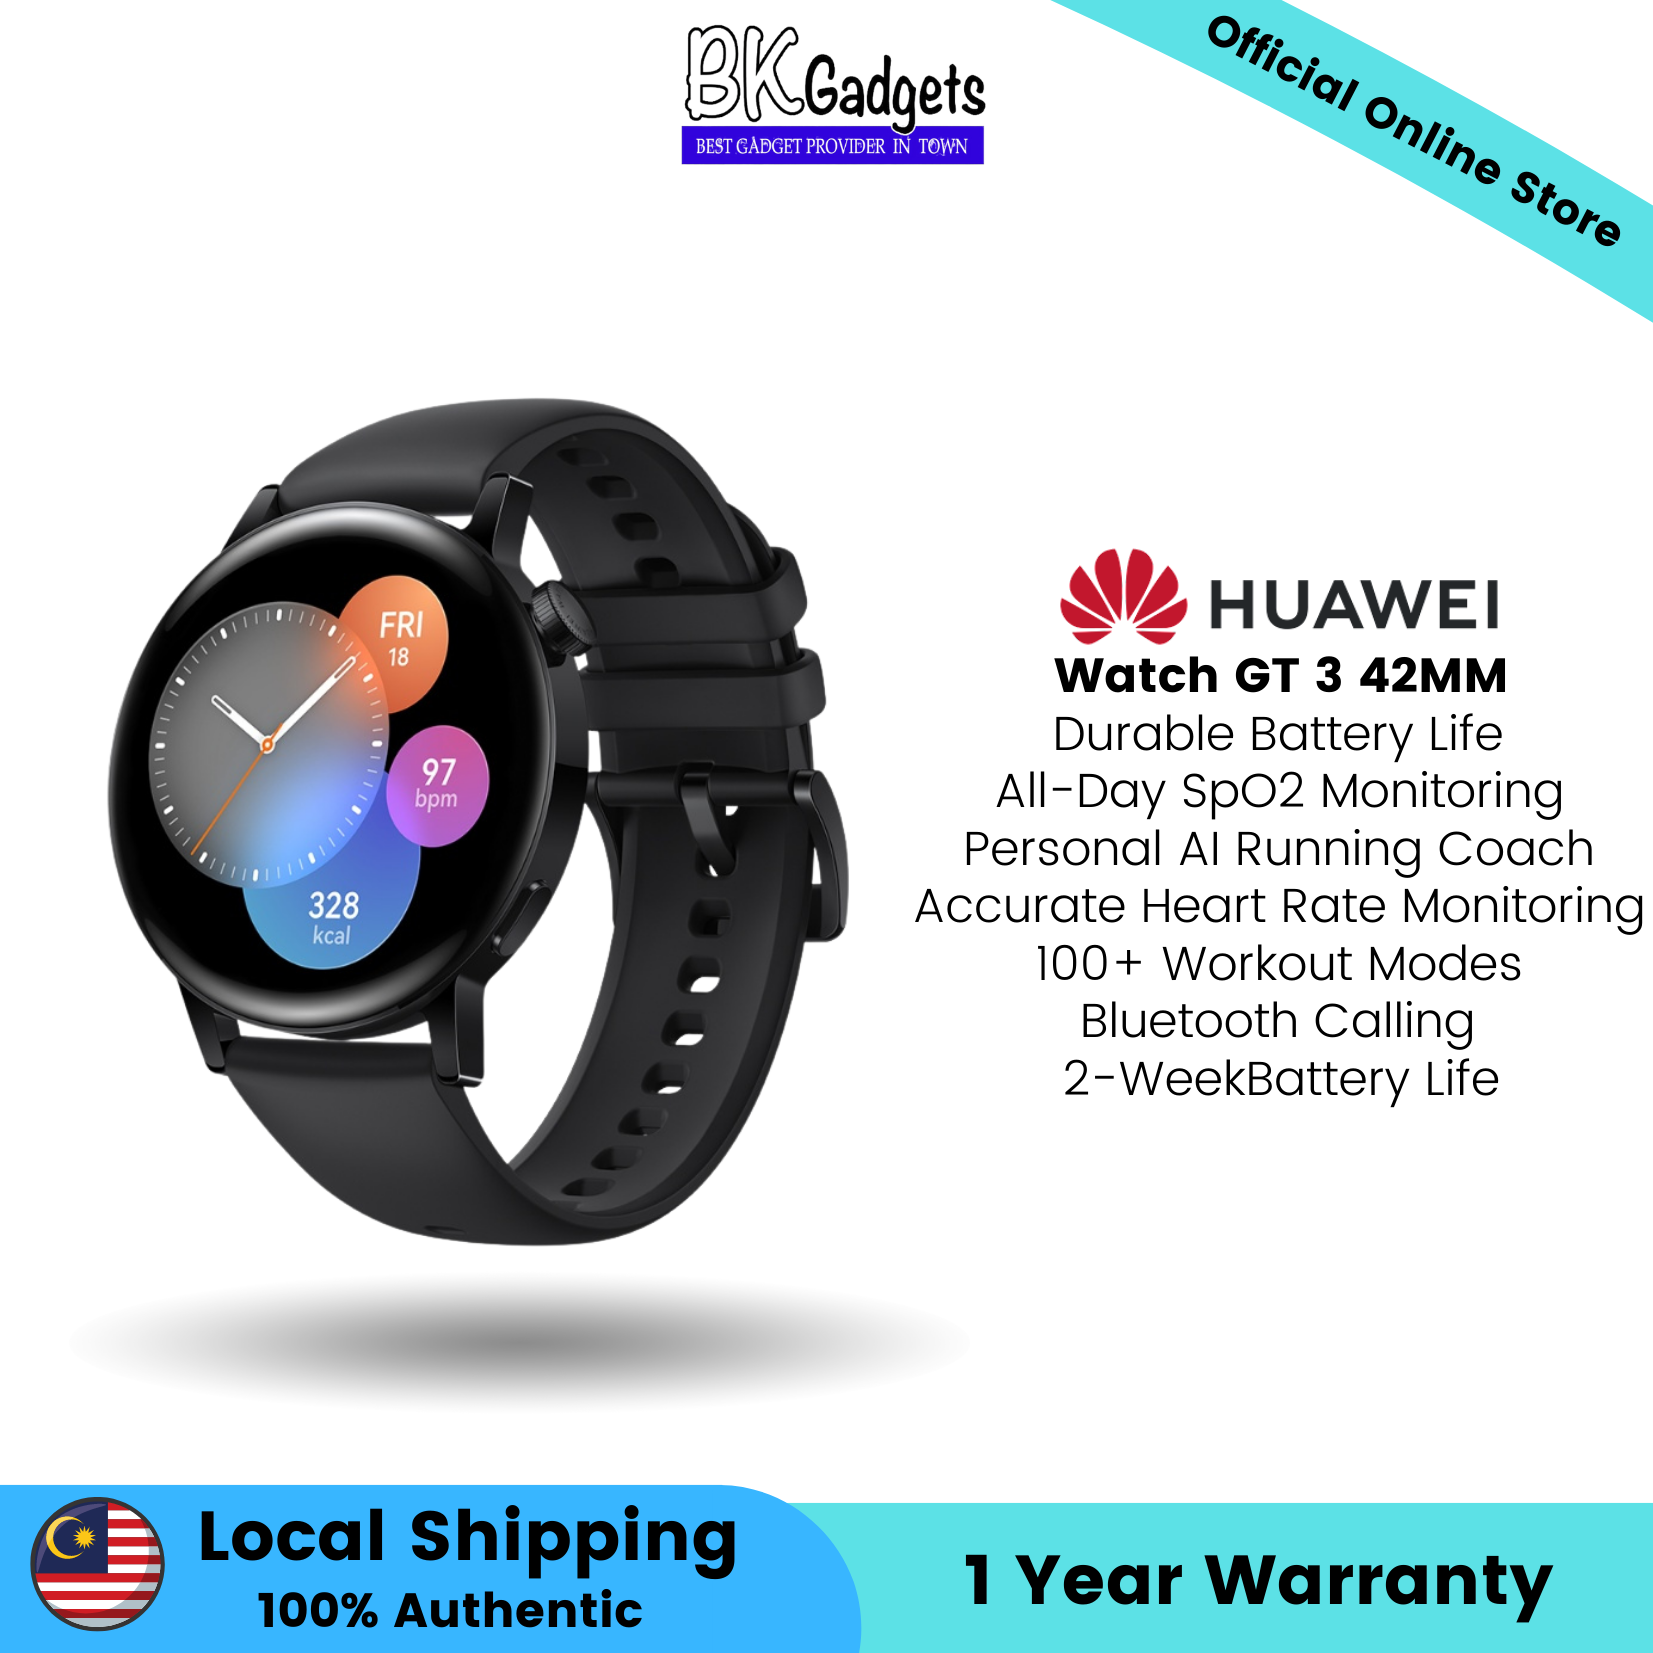 Huawei Watch GT 3 42MM Black - All day SpO2 Monitoring | 100+ Workout Modes | Bluetooth Calling